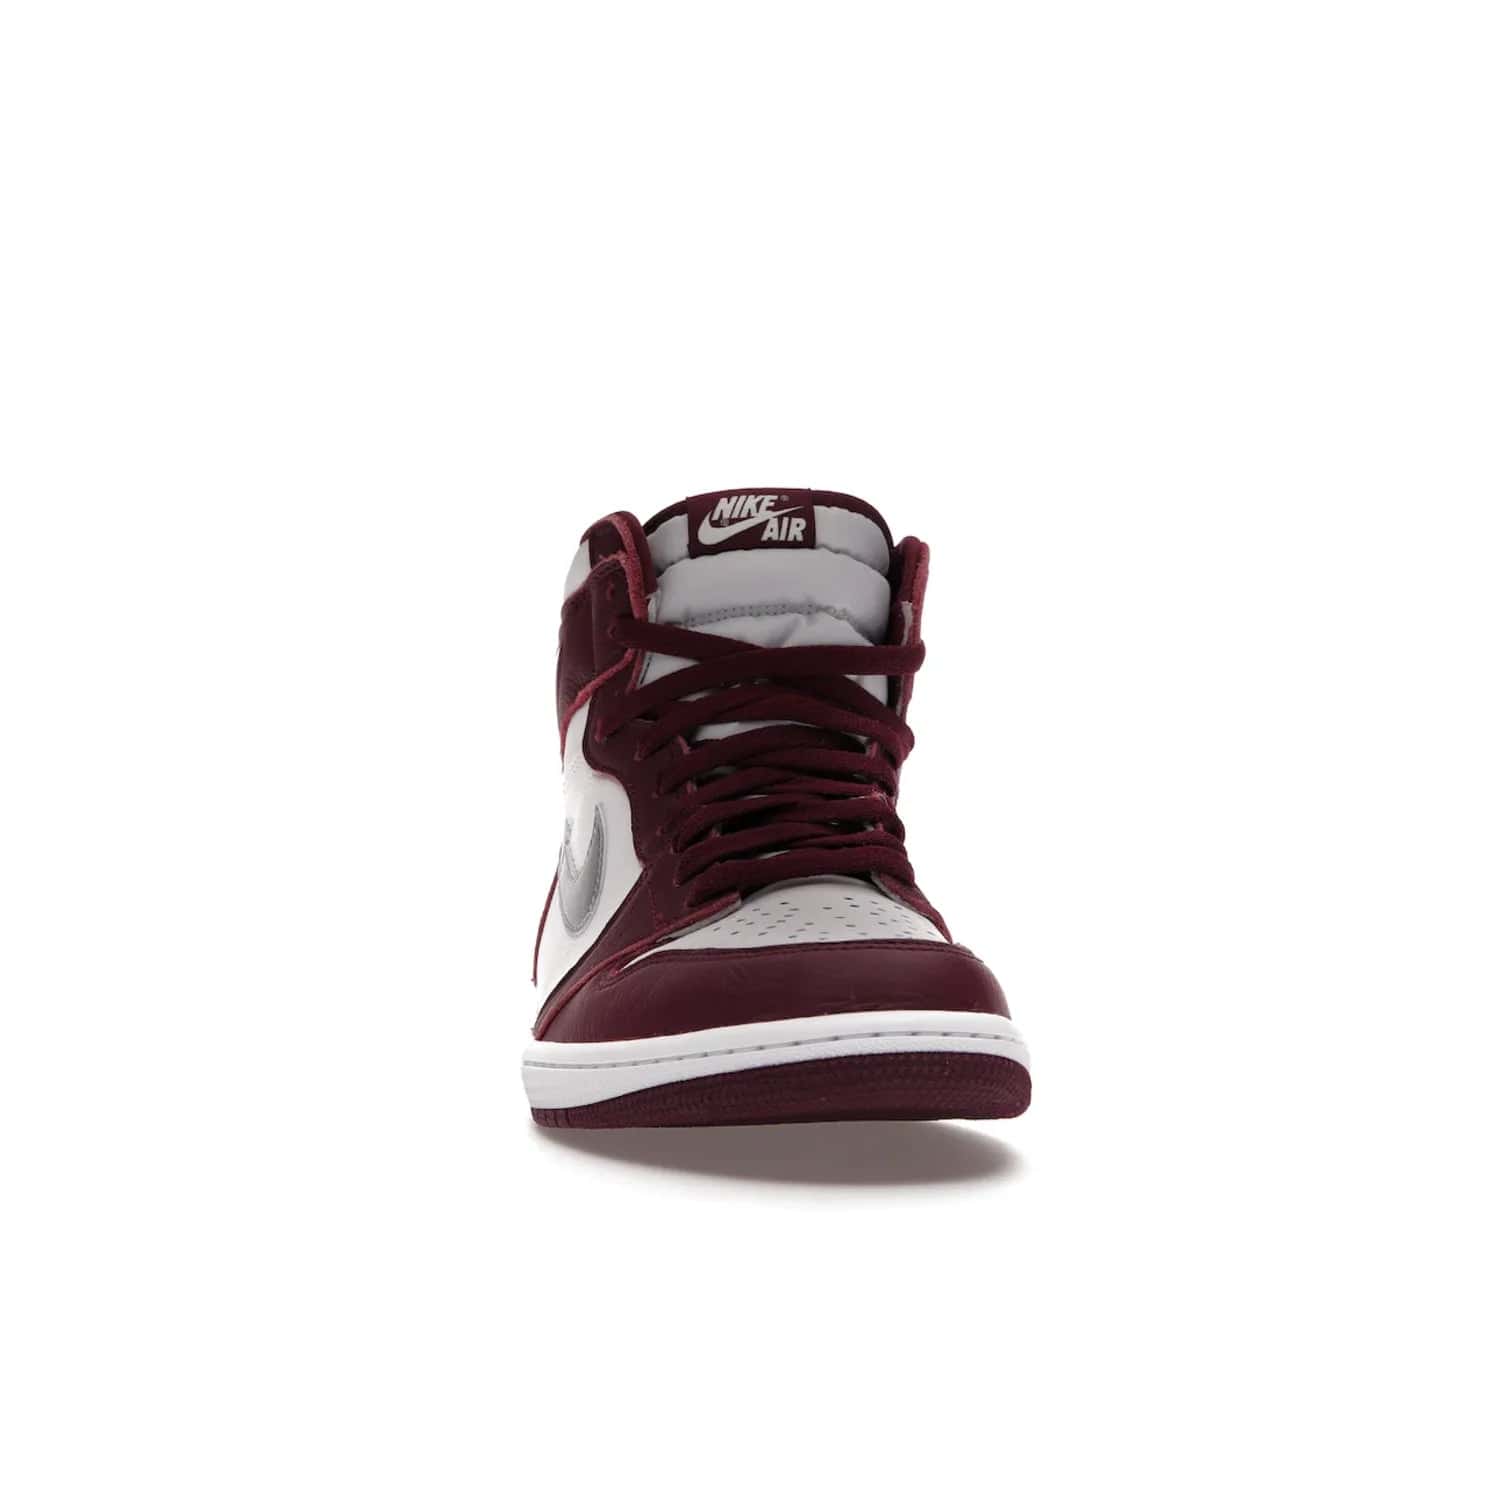 Jordan 1 Retro High OG Bordeaux - Image 9 - Only at www.BallersClubKickz.com - Shop the classic Air Jordan 1 High Bordeaux with a modern high-top cut. The timeless Bordeaux and White-Metallic Silver colorway, releasing Nov 20, 2021, is perfect for practice or a night out.